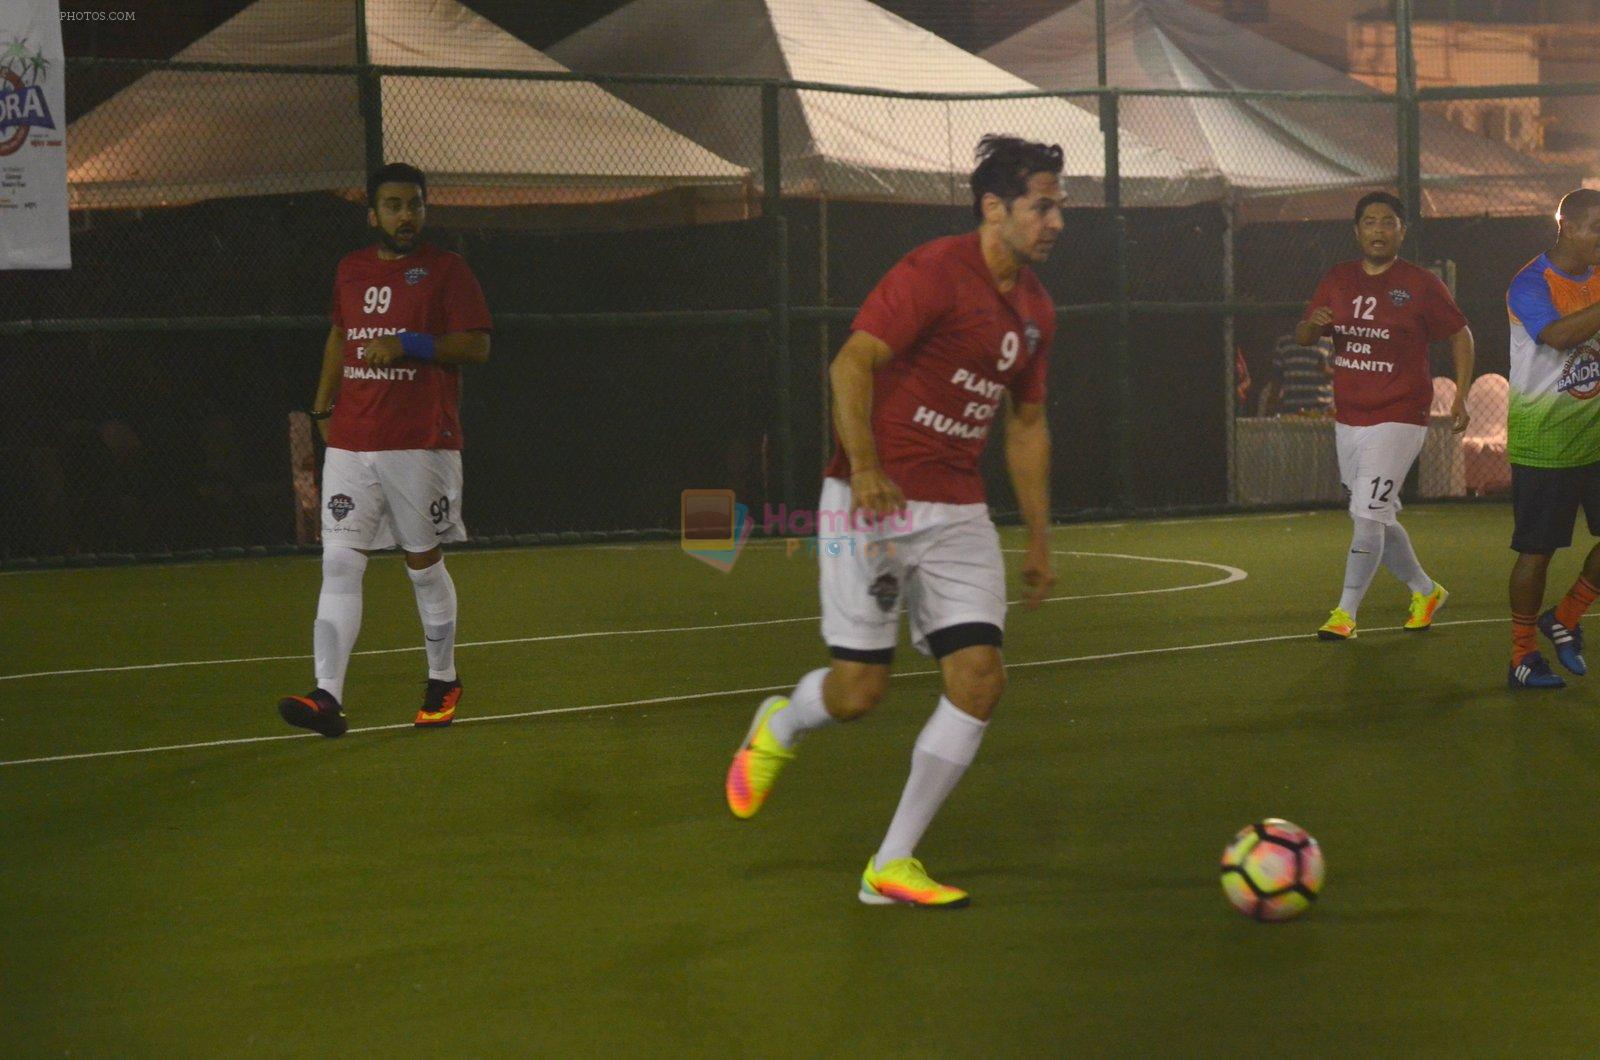 Dino Morea at charity soccer match on 13th Nov 2016